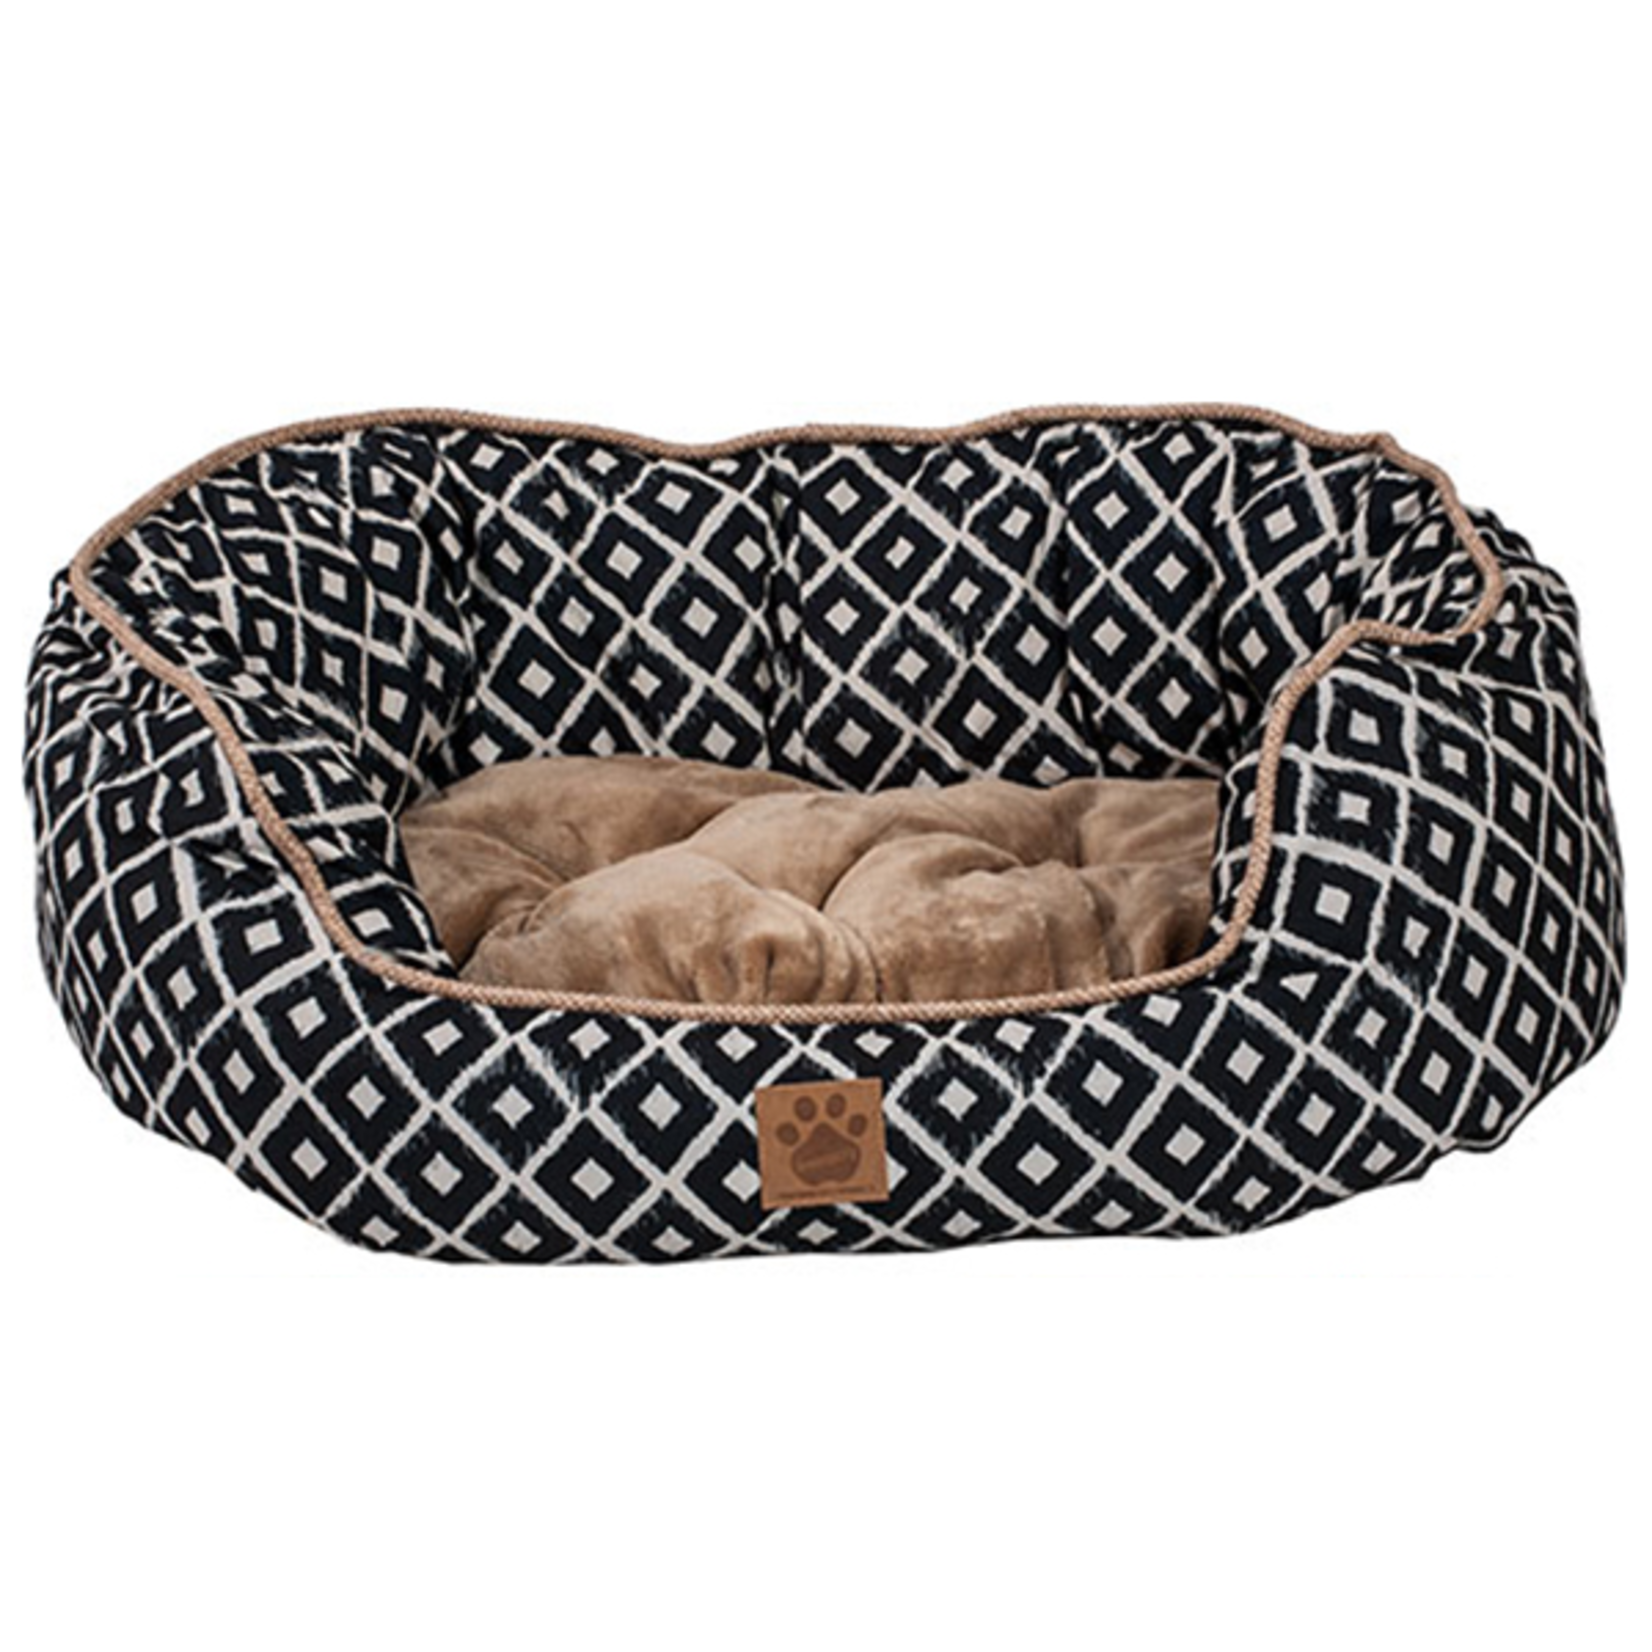 Snoozzy Snz Ikat Daydreamer Bed Navy 32x25x9.5"